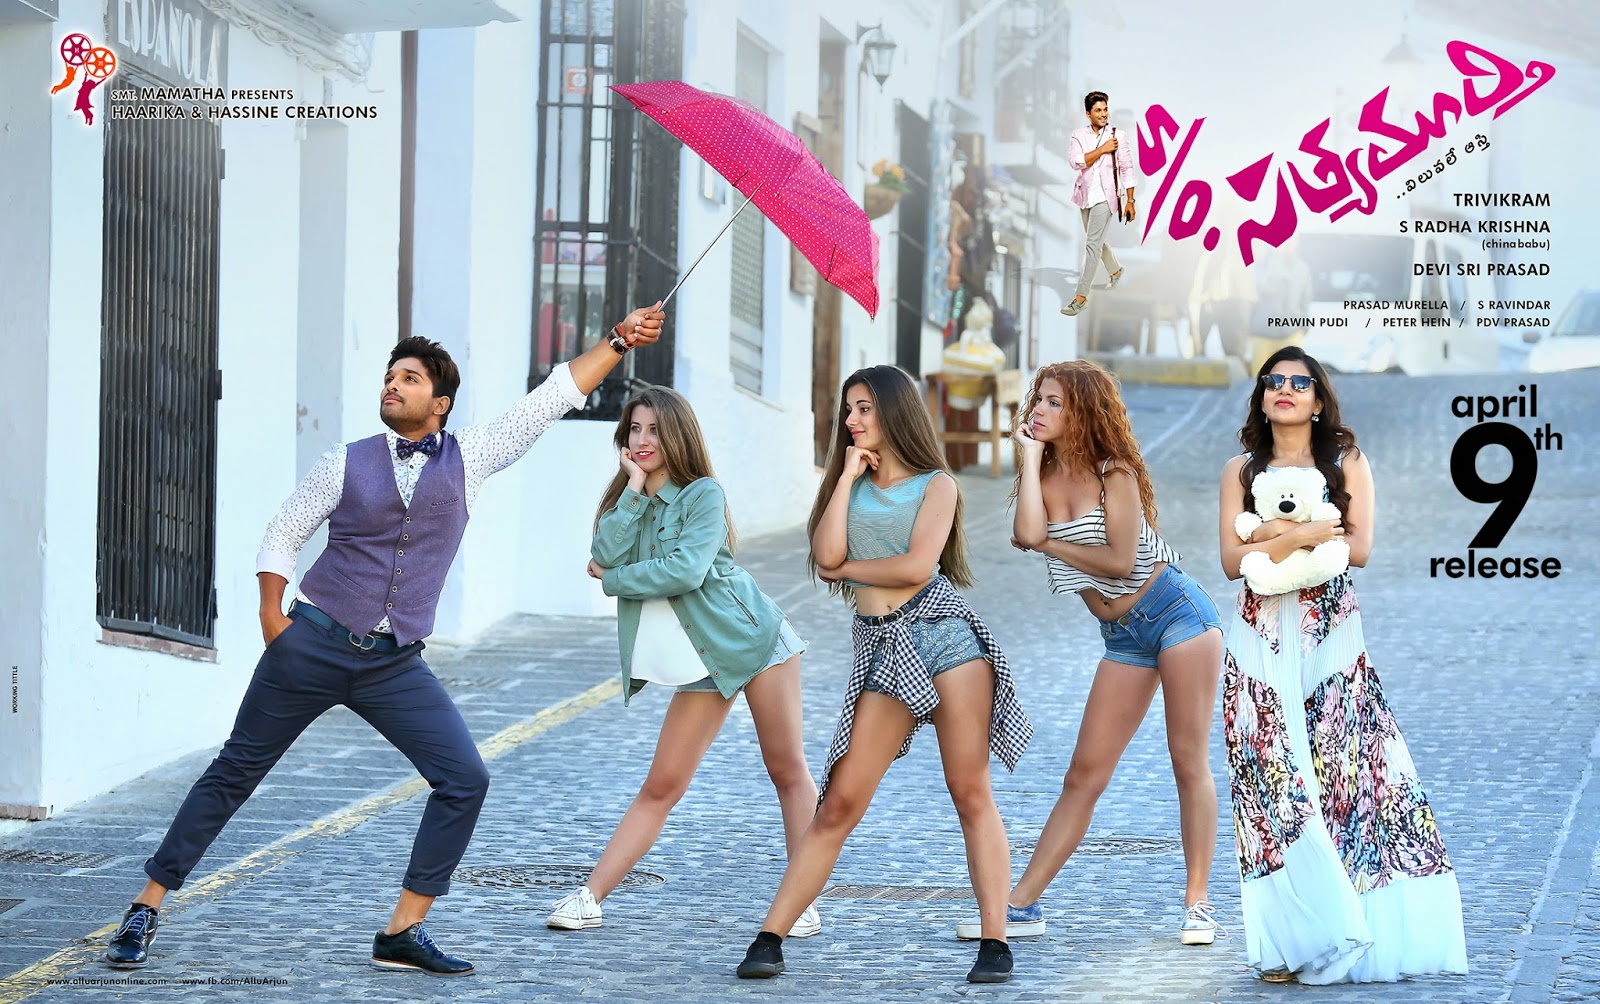 Fourth Day (Sunday) Collection of S/o Satyamurthy: Tremendous Biz. Report